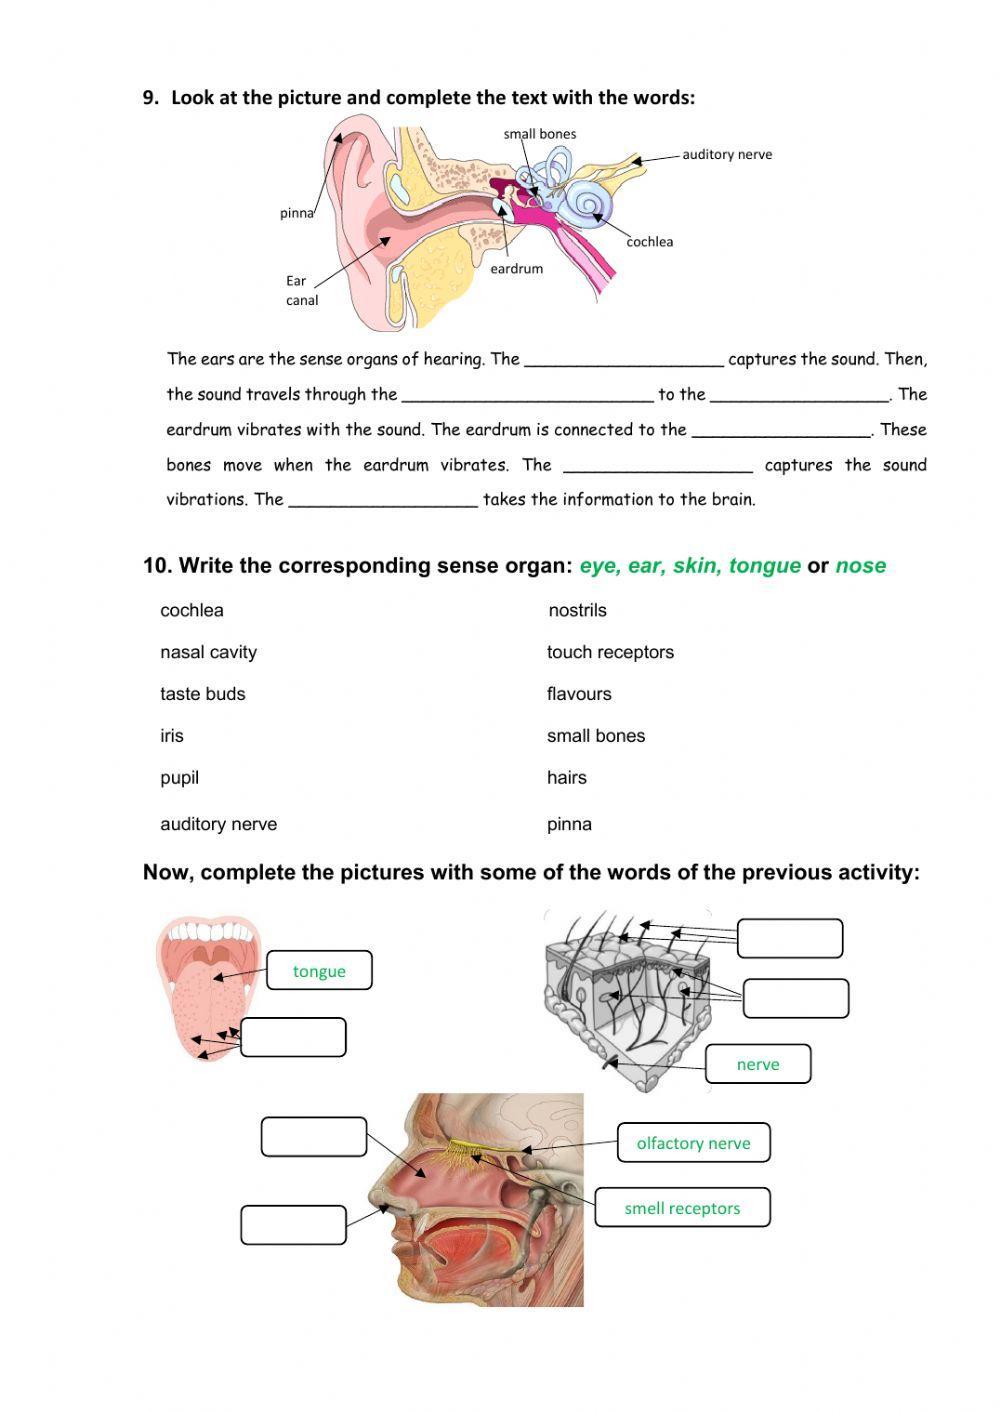 Human body systems and senses test